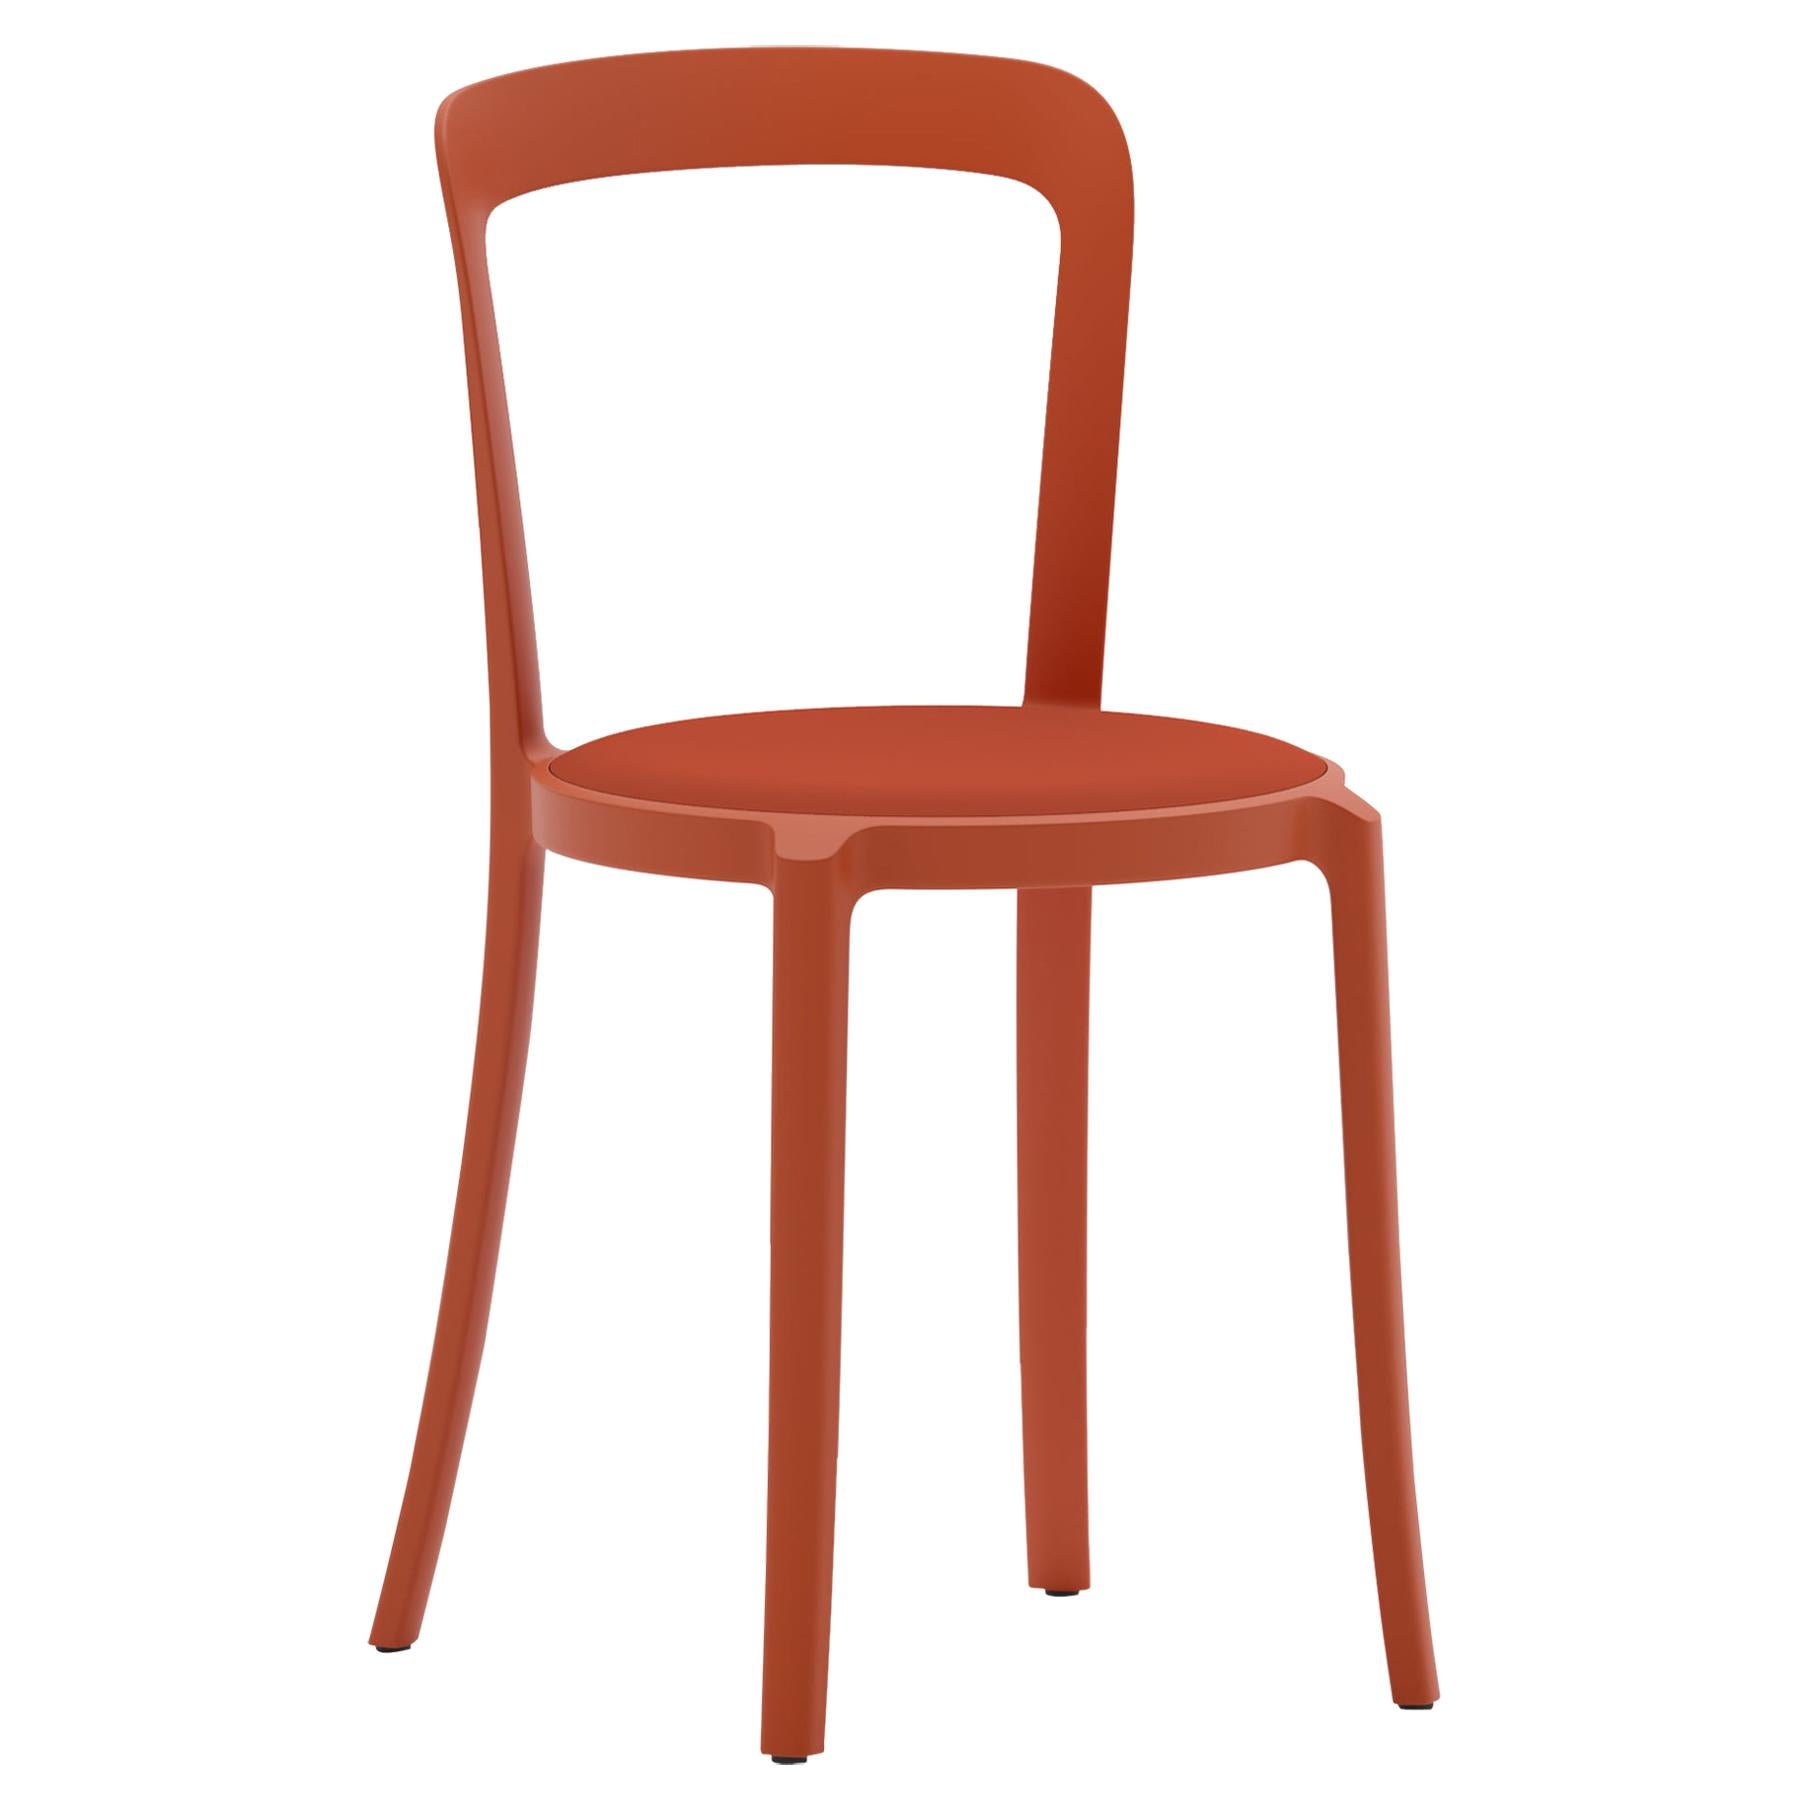 On & On Stacking Chair in Plastic with Orange Fabric 1 by Barber & Osgerby For Sale